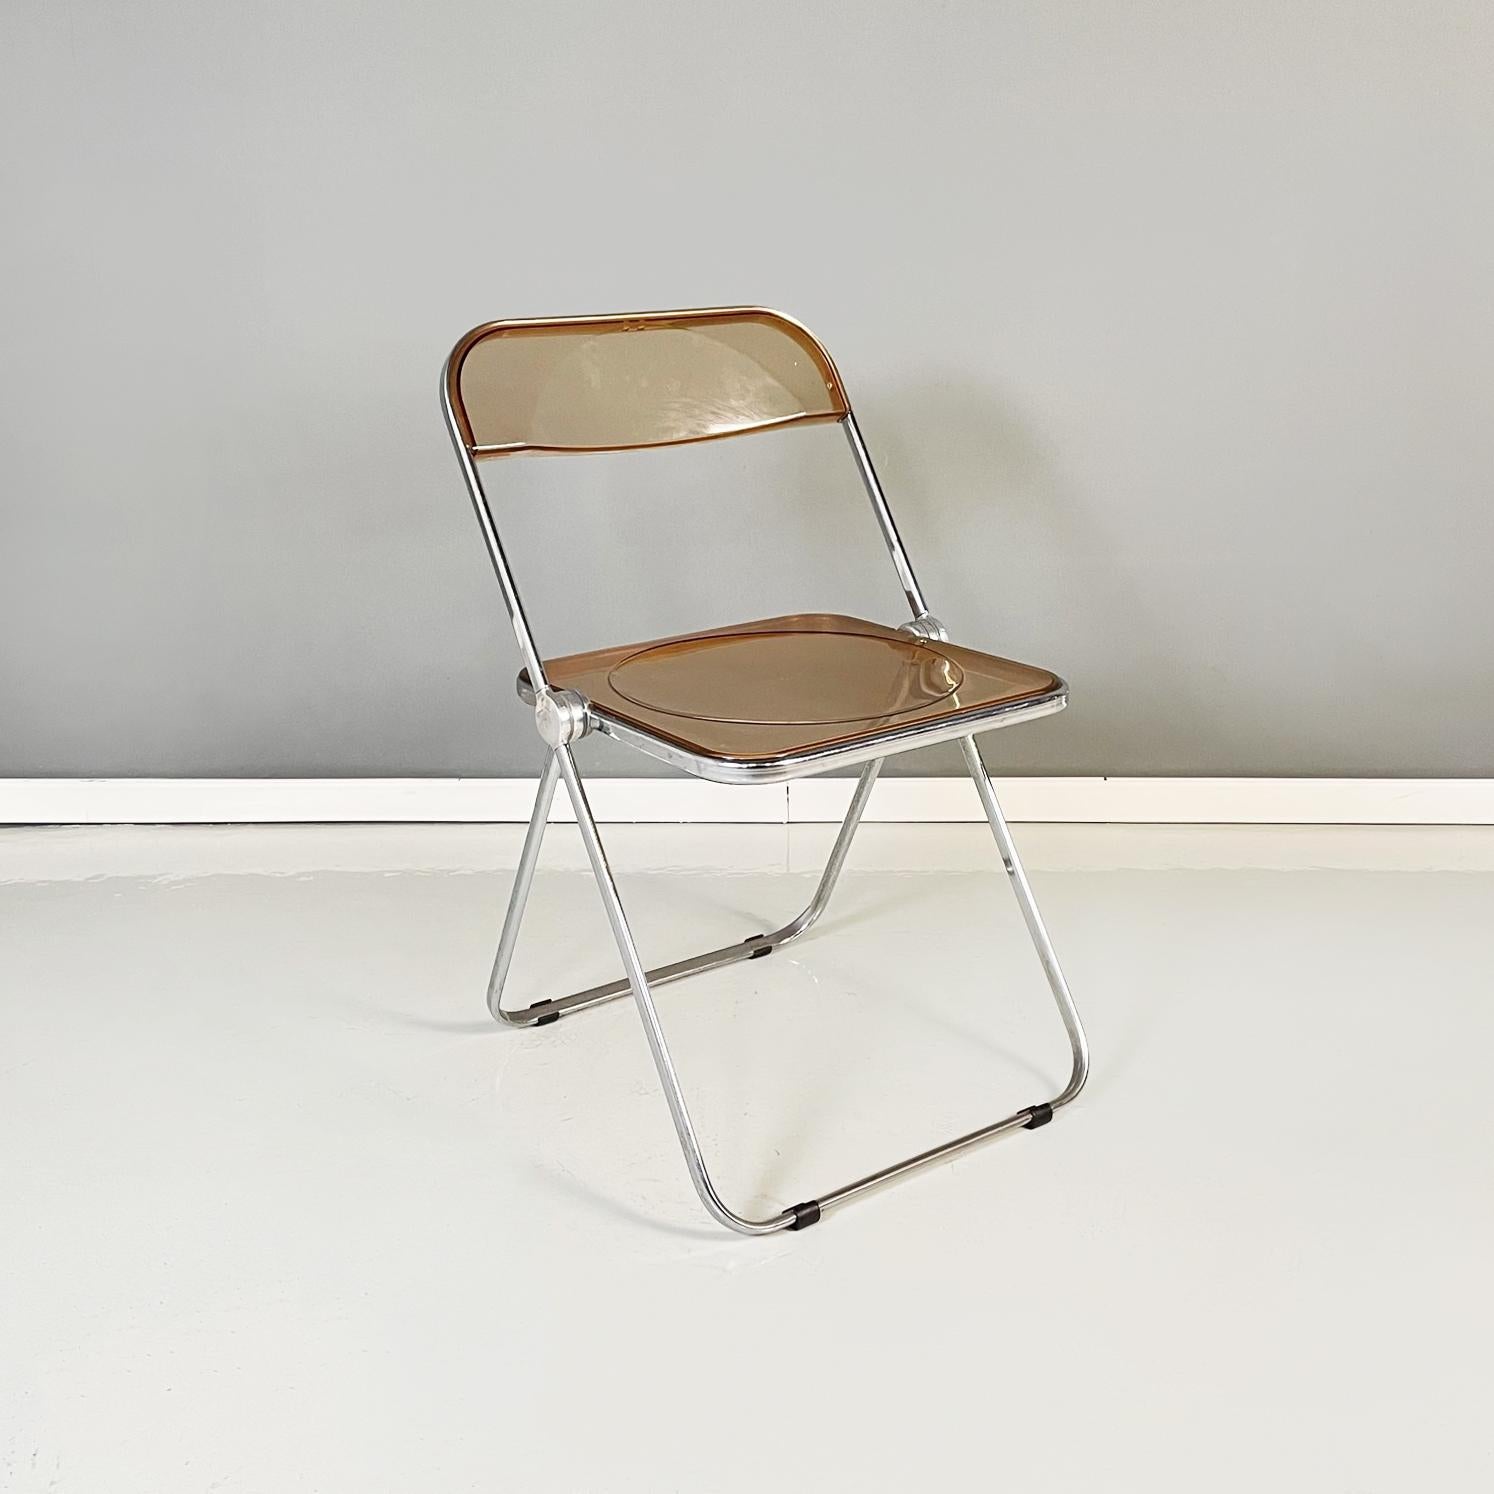 Italian modern Folding chairs mod. Plia by Giancarlo Piretti for Anonima Castelli, 1970s
Set of 3 iconic and fantastic folding chairs mod. Plia with square seat and back smoked brown-black abs. The structure is in steel.
They are produced by